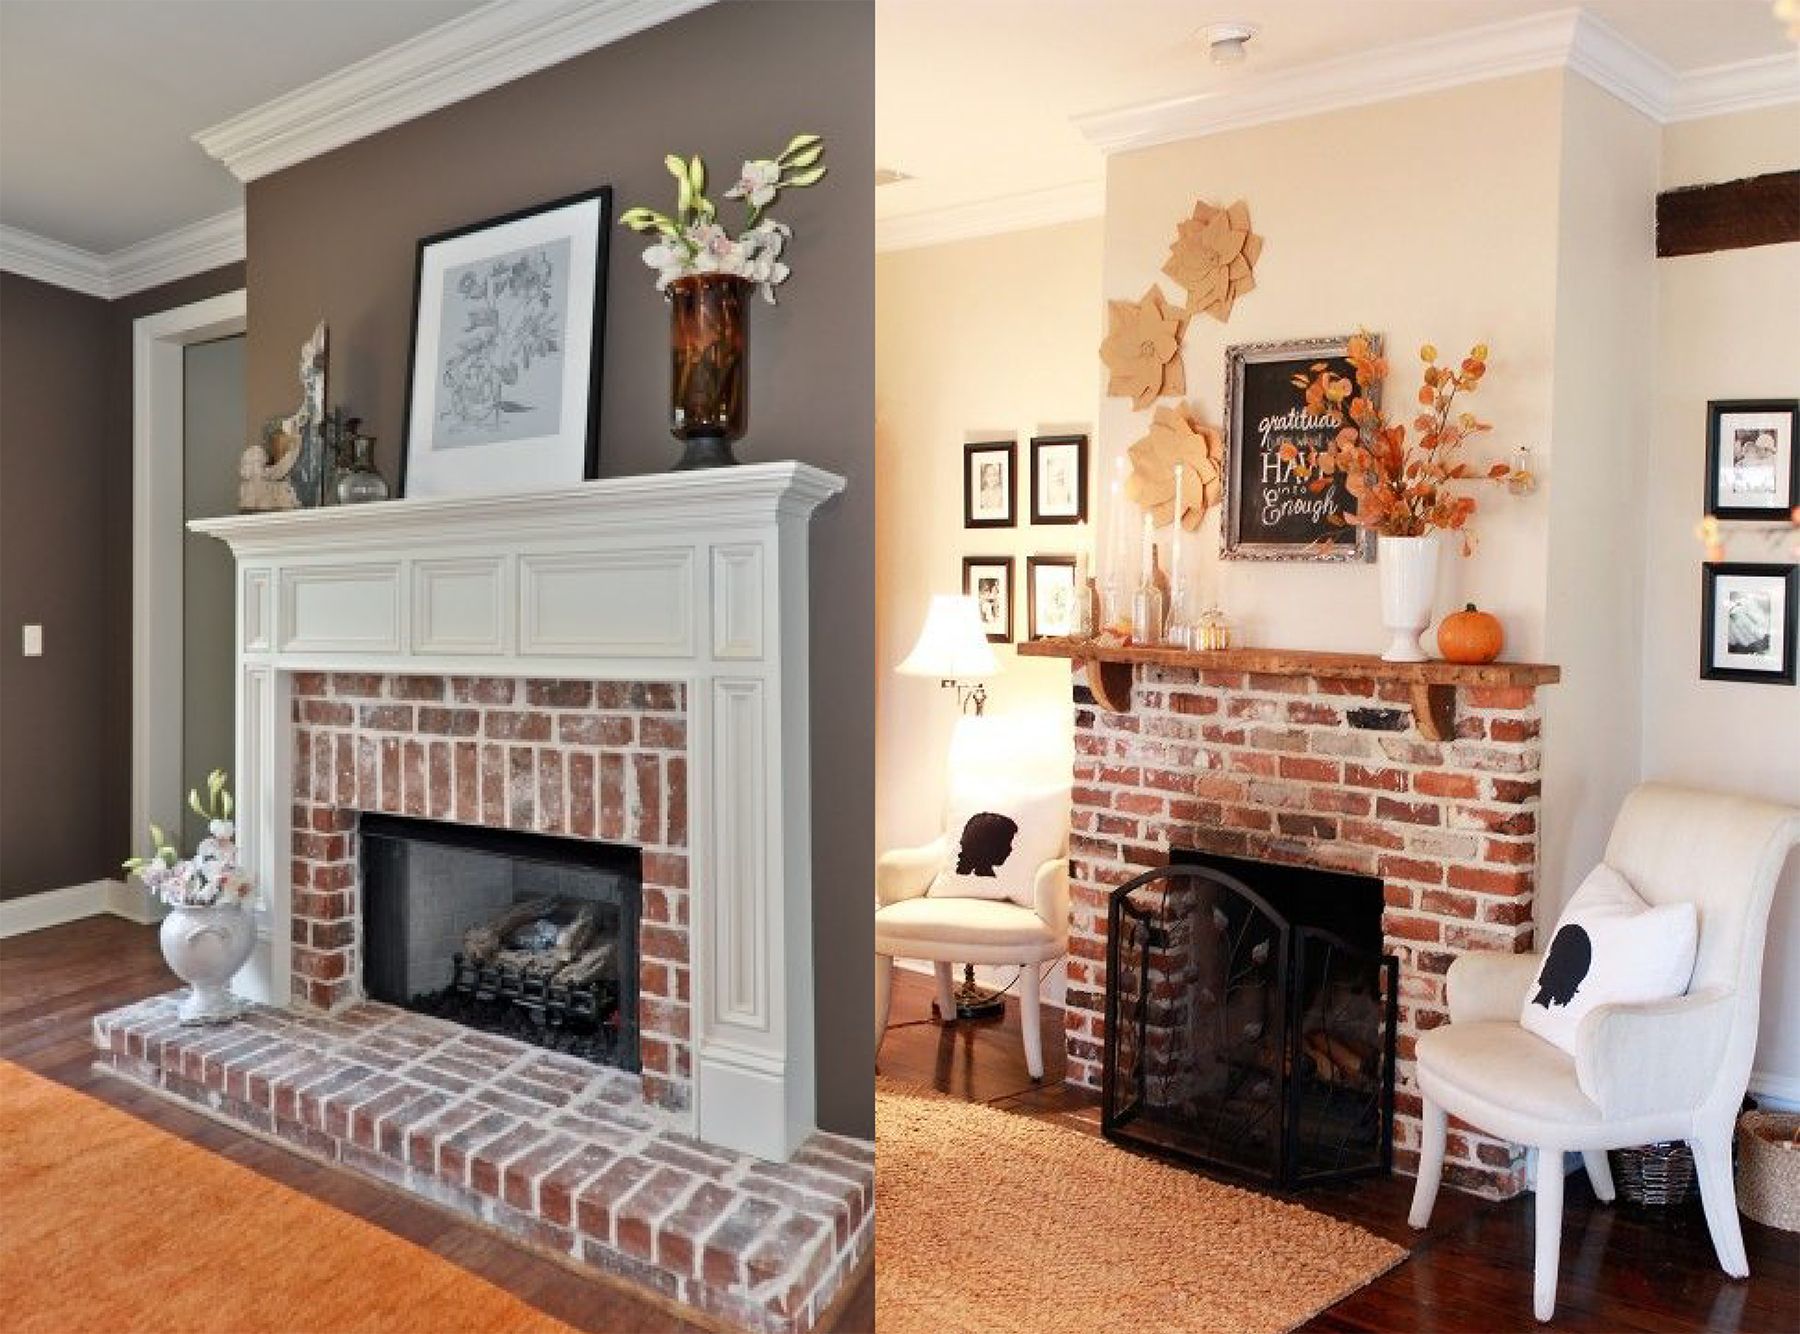 Regency Fireplace Parts Elegant Exposed Brick Fireplace Almond Home In 2019